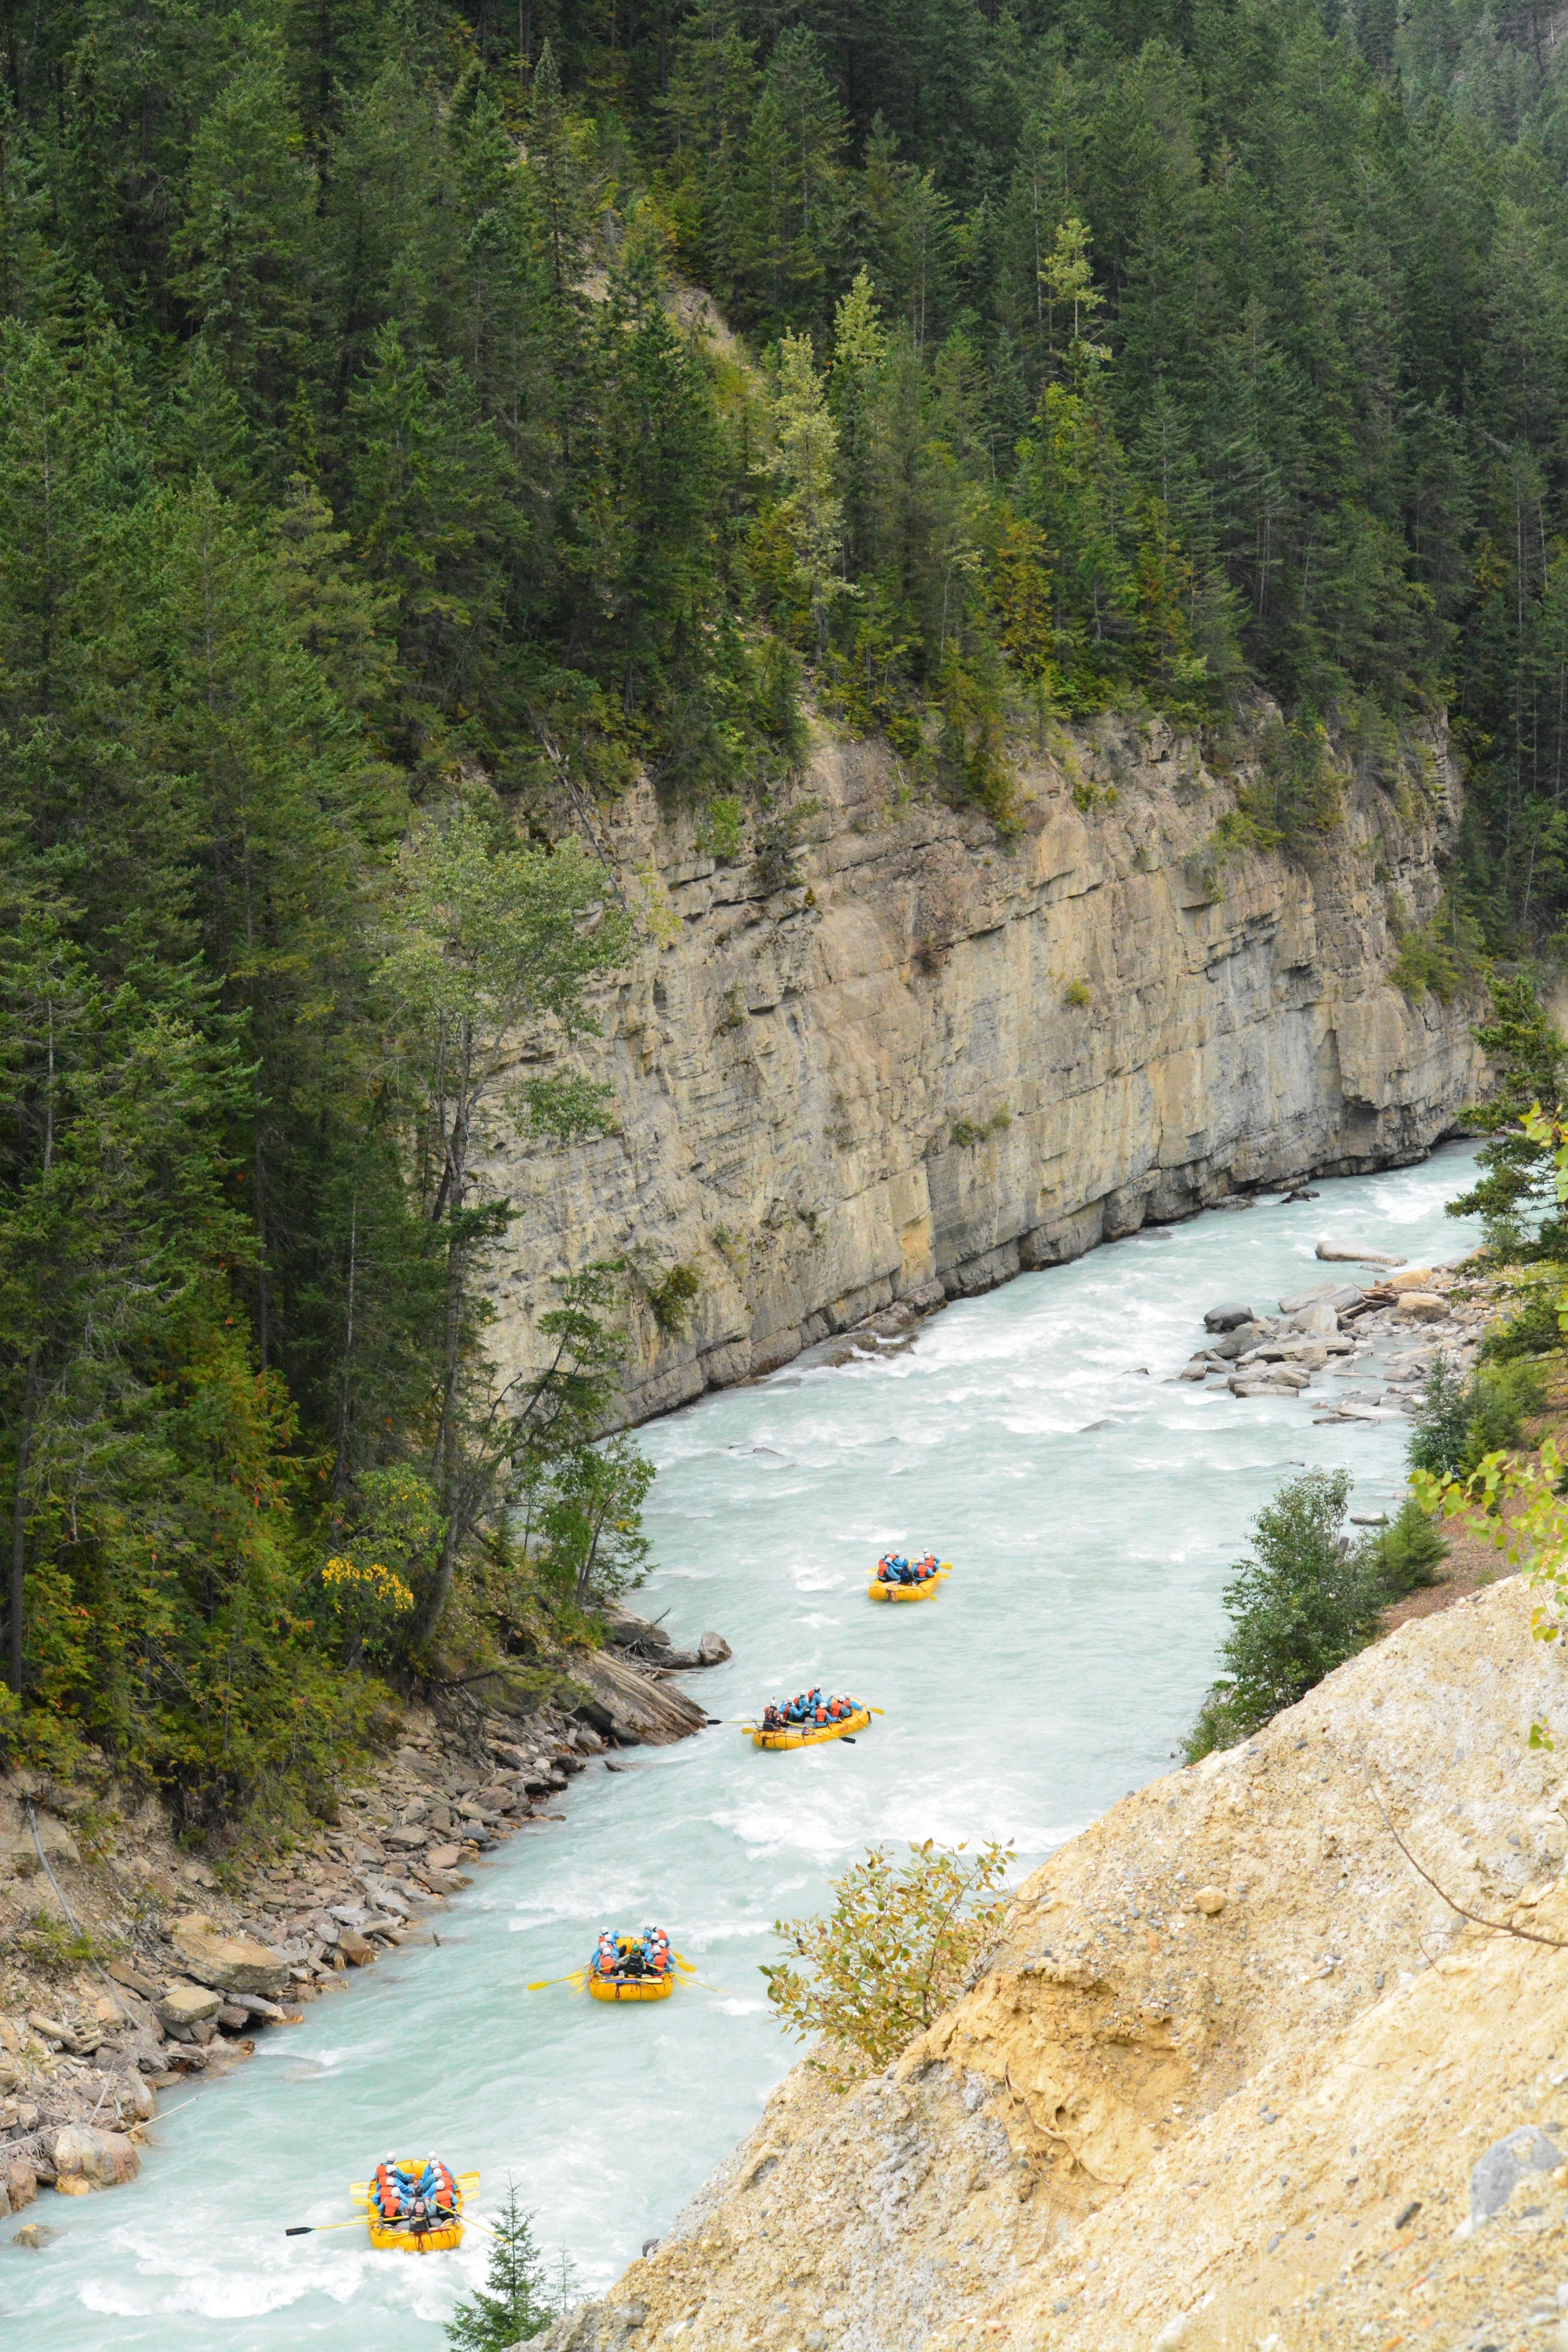  White-water rafting, Golden, Canada 